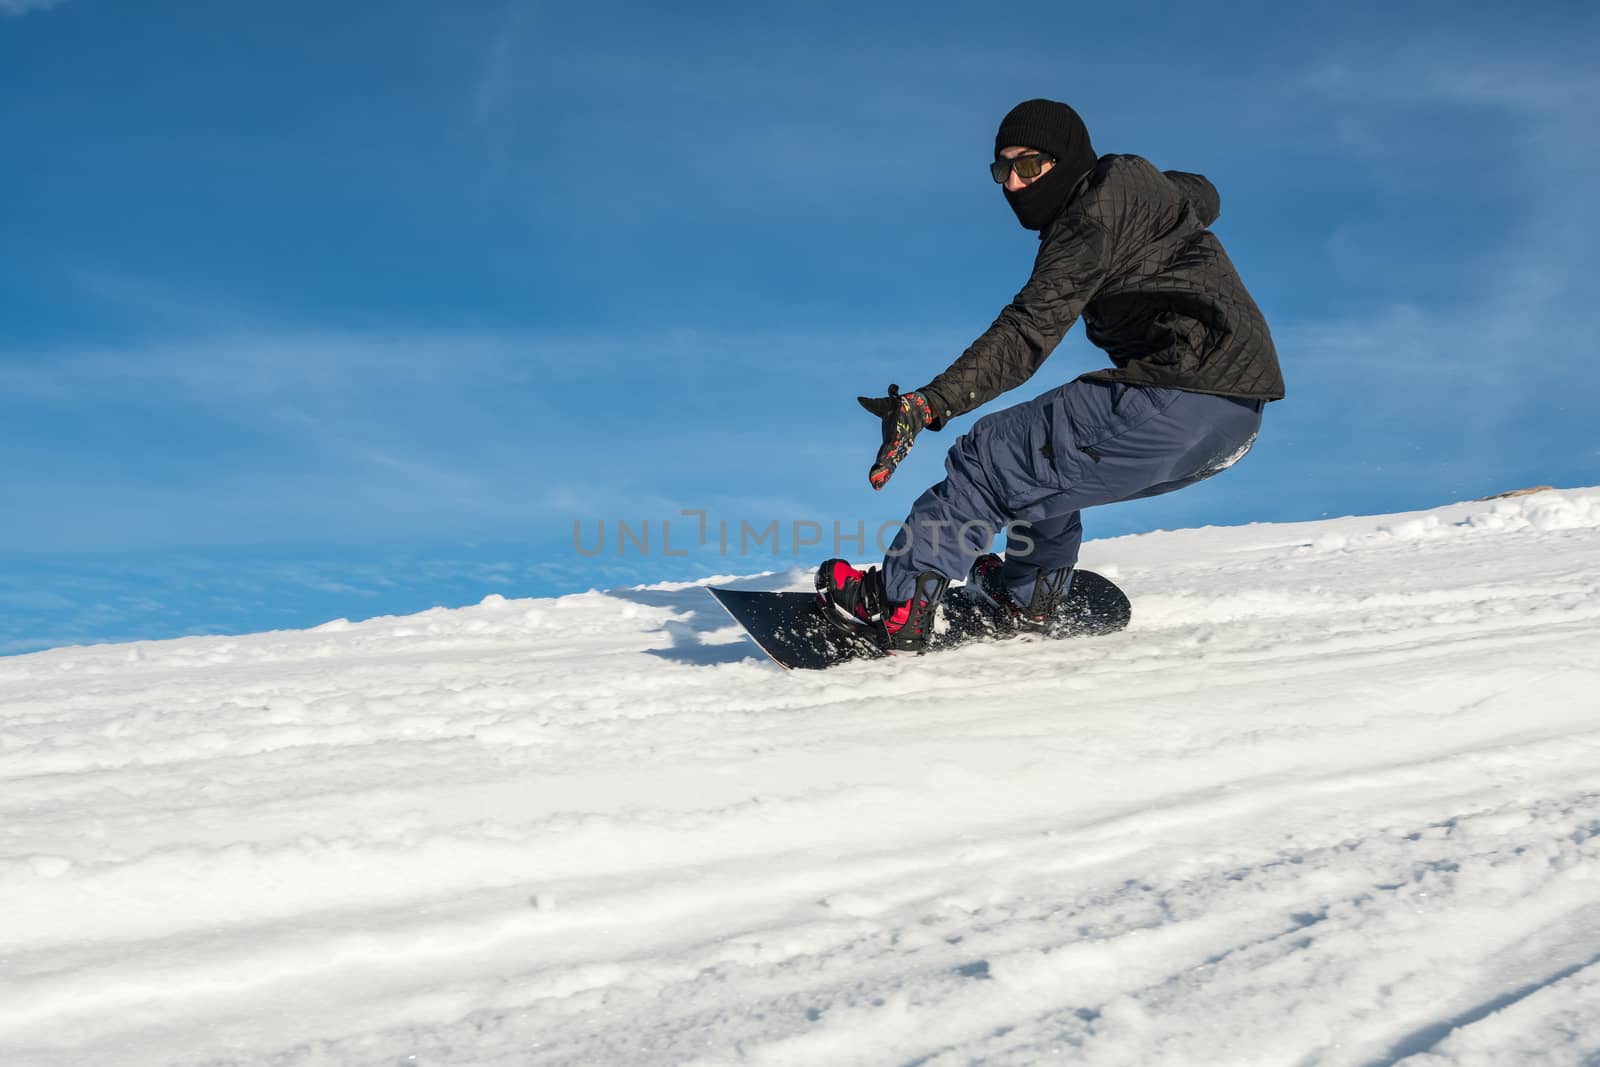 Snowboard freerider in the mountains by homydesign